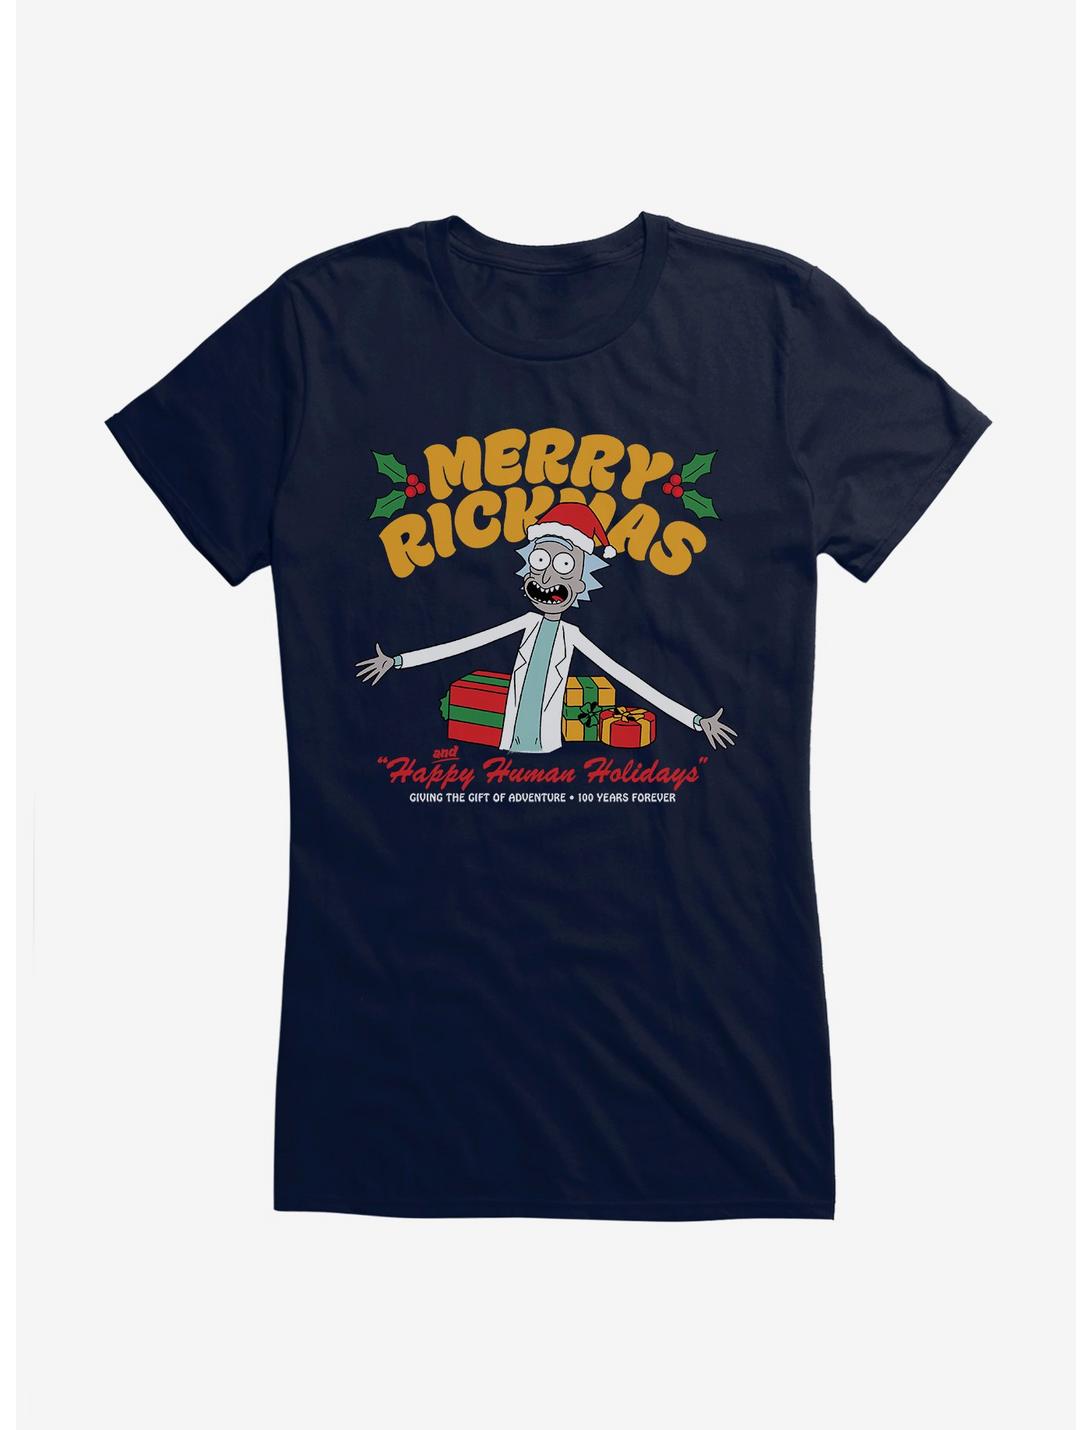 Rick And Morty Gift Of Adventure Girls T-Shirt, , hi-res